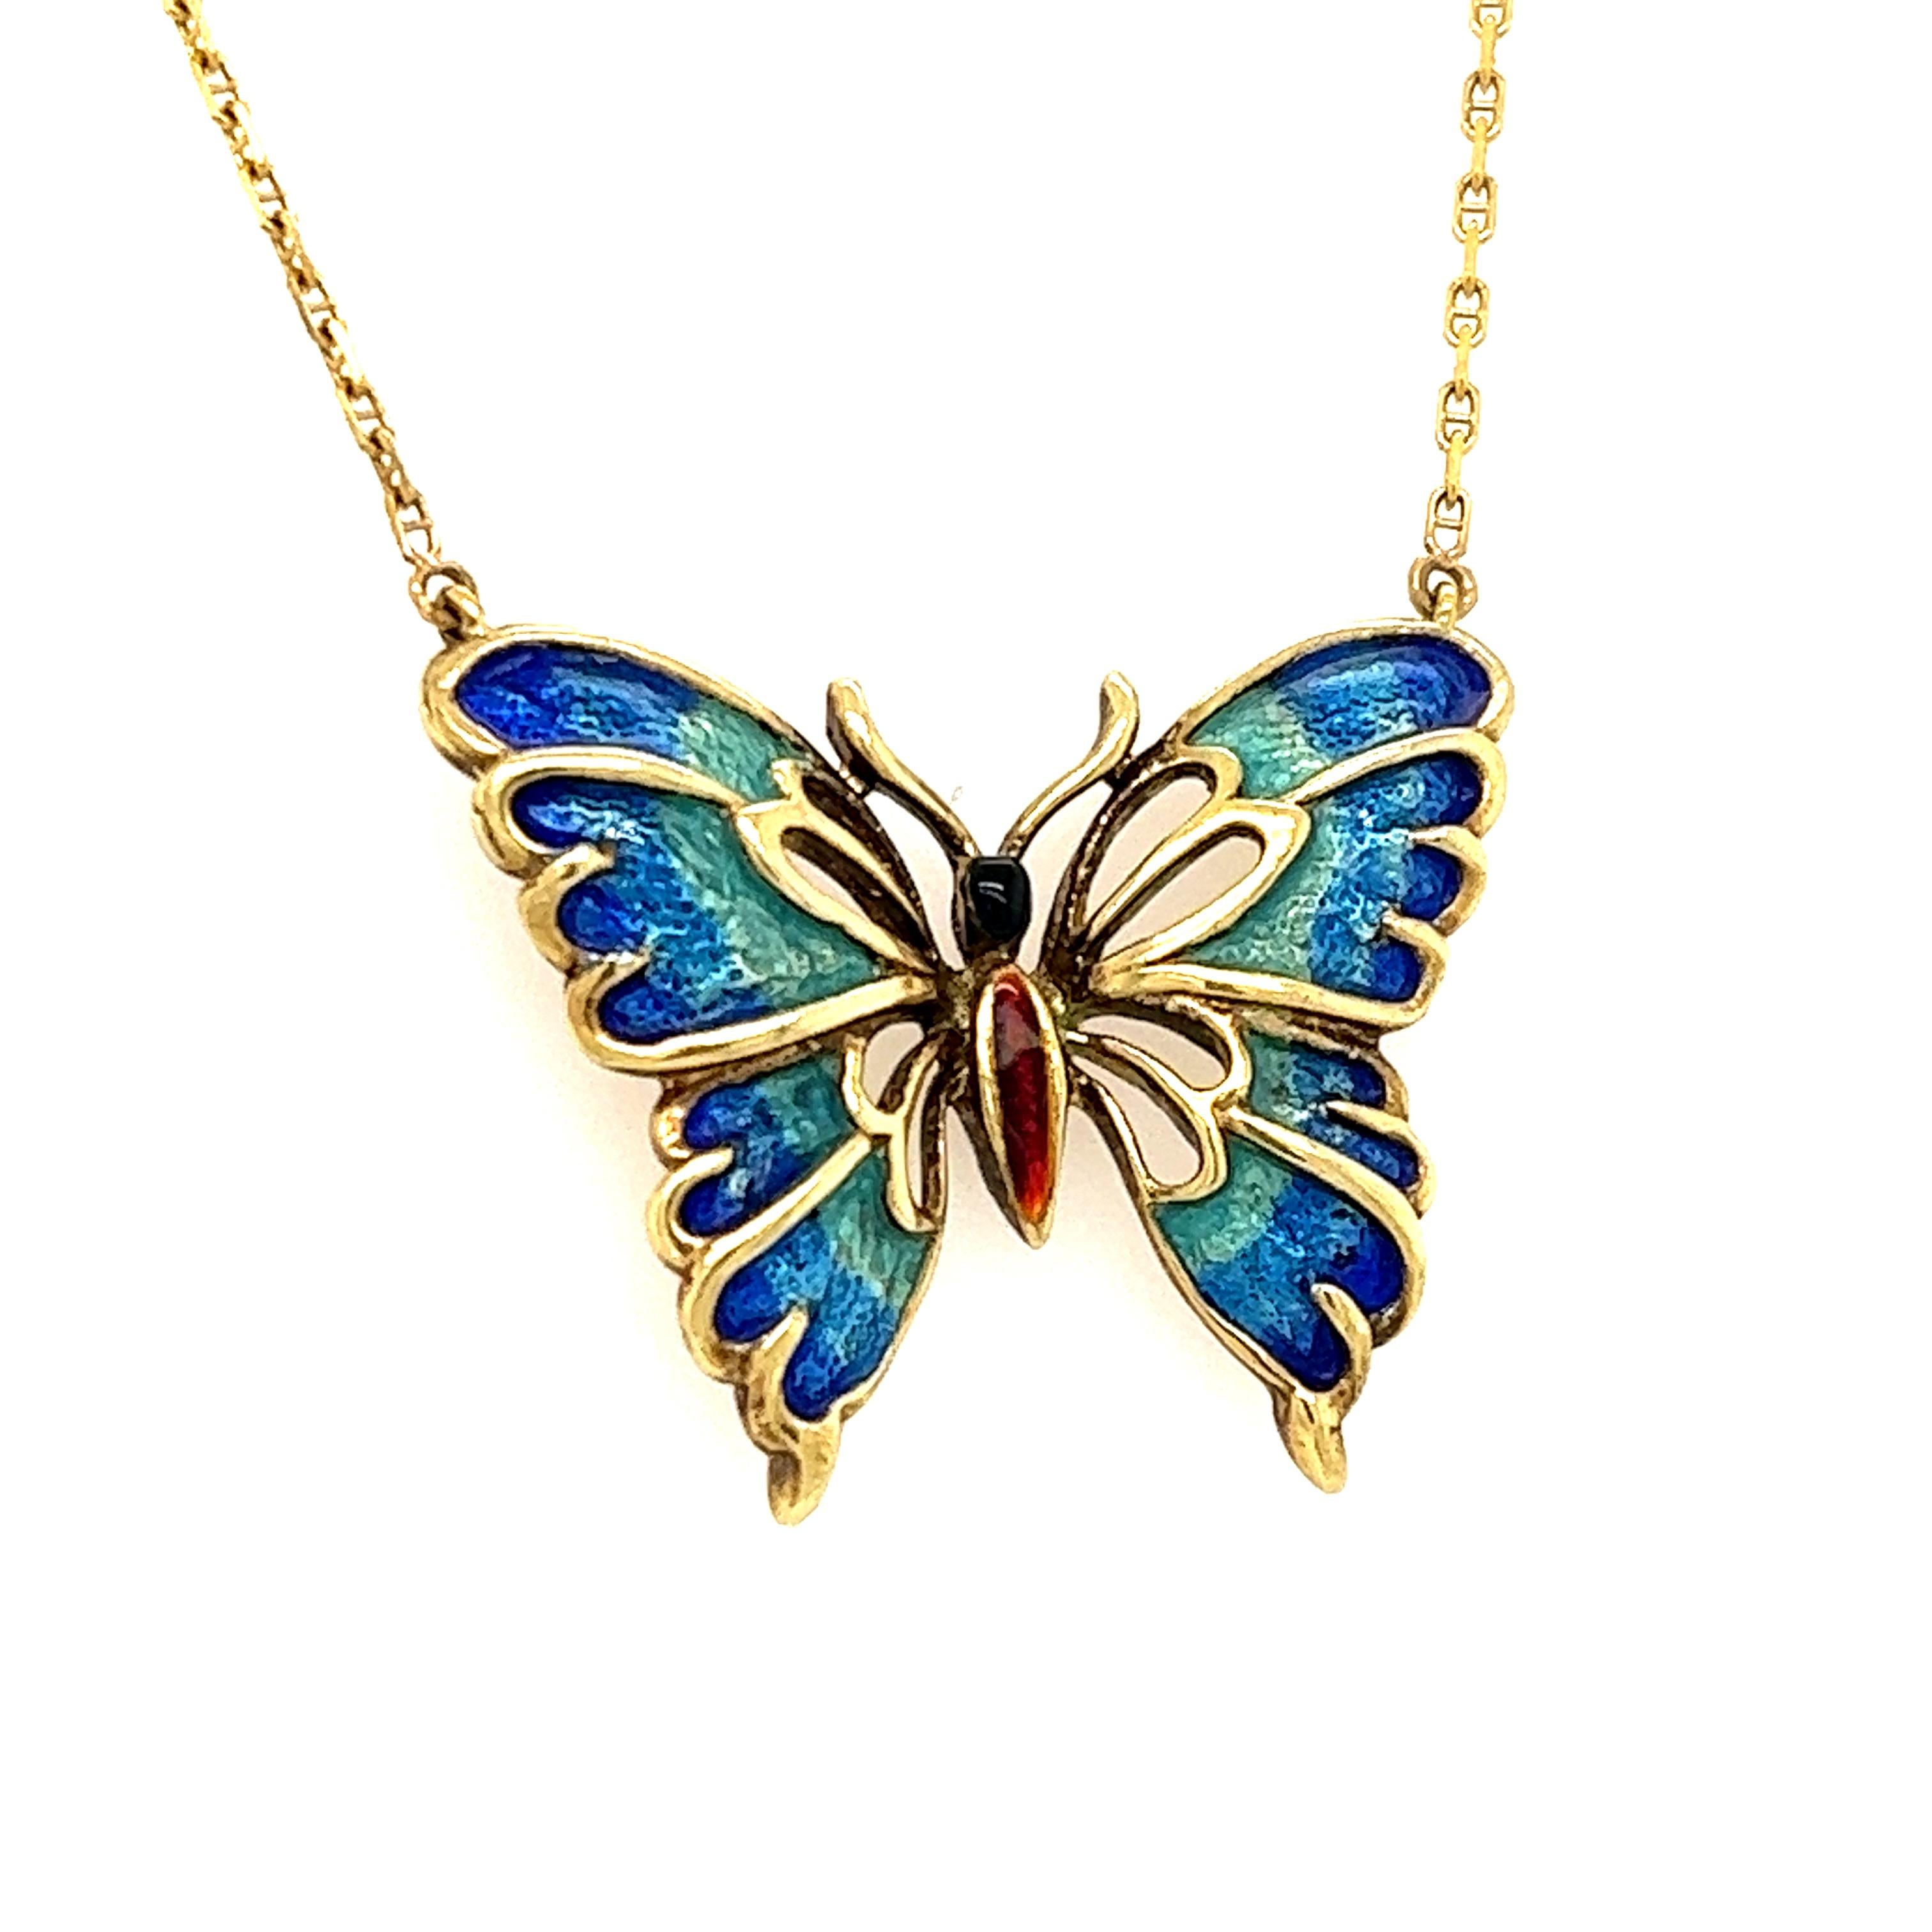 Beautiful everyday necklace crafted in 14k yellow gold. This beautiful necklace highlights one butterfly pendant which is enameled with vibrant shades of blue and green.  The colors pop off the design and contrast beautifully against the yellow